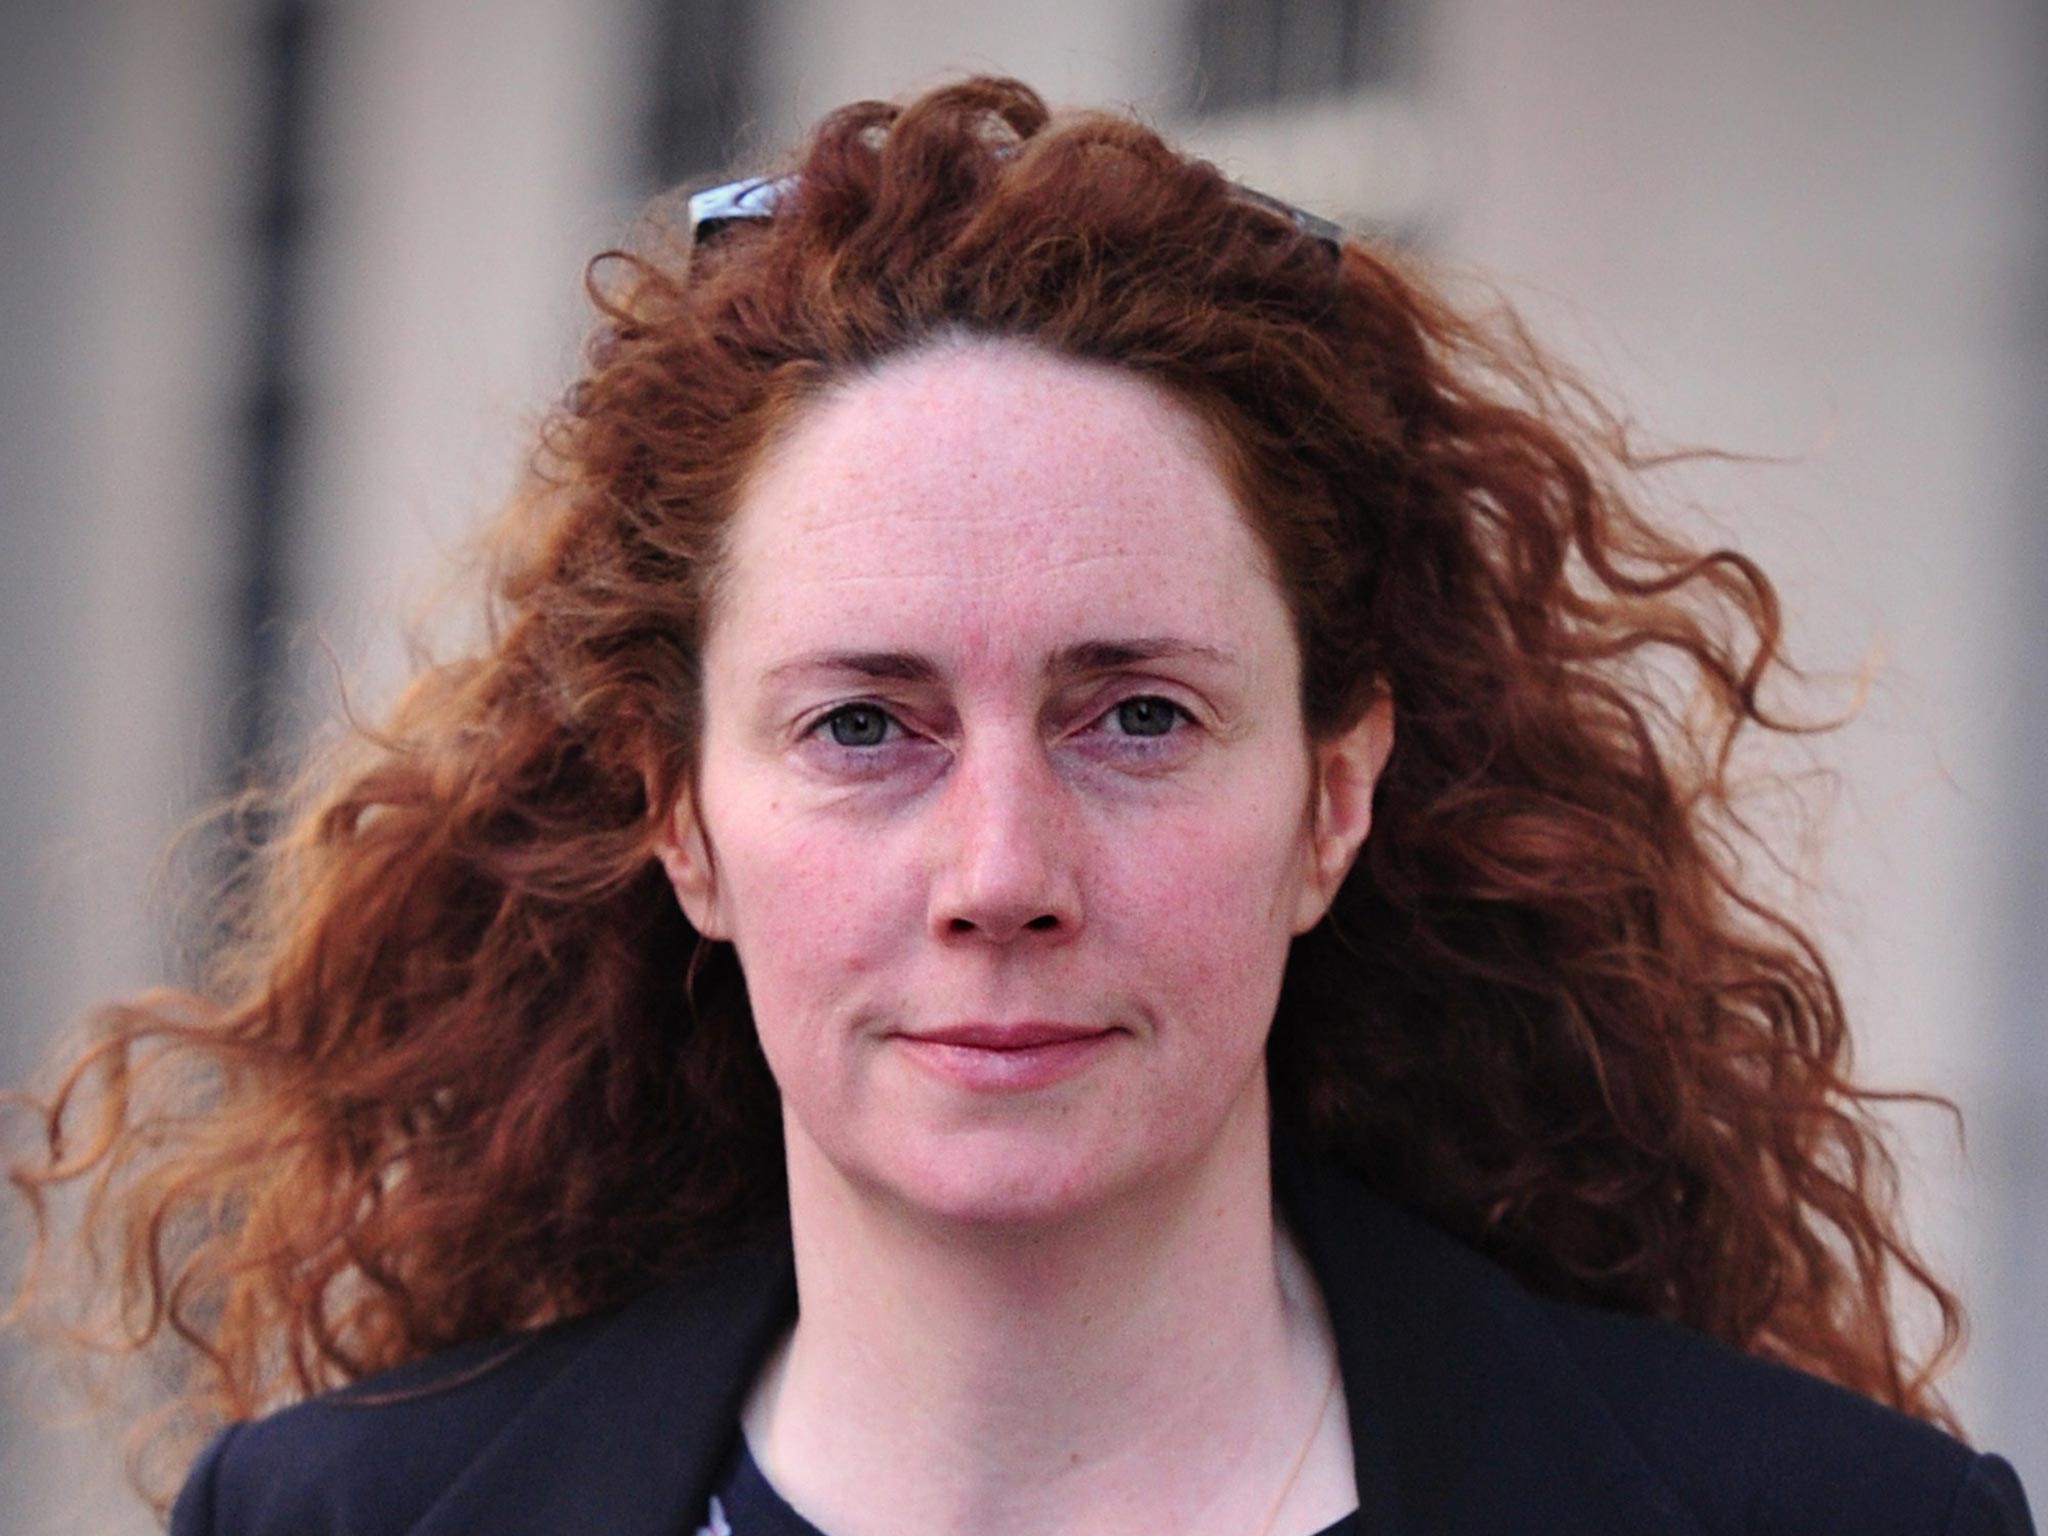 Rebekah Brooks was accused of taking advantage of advance warning of arrest
to hide evidence